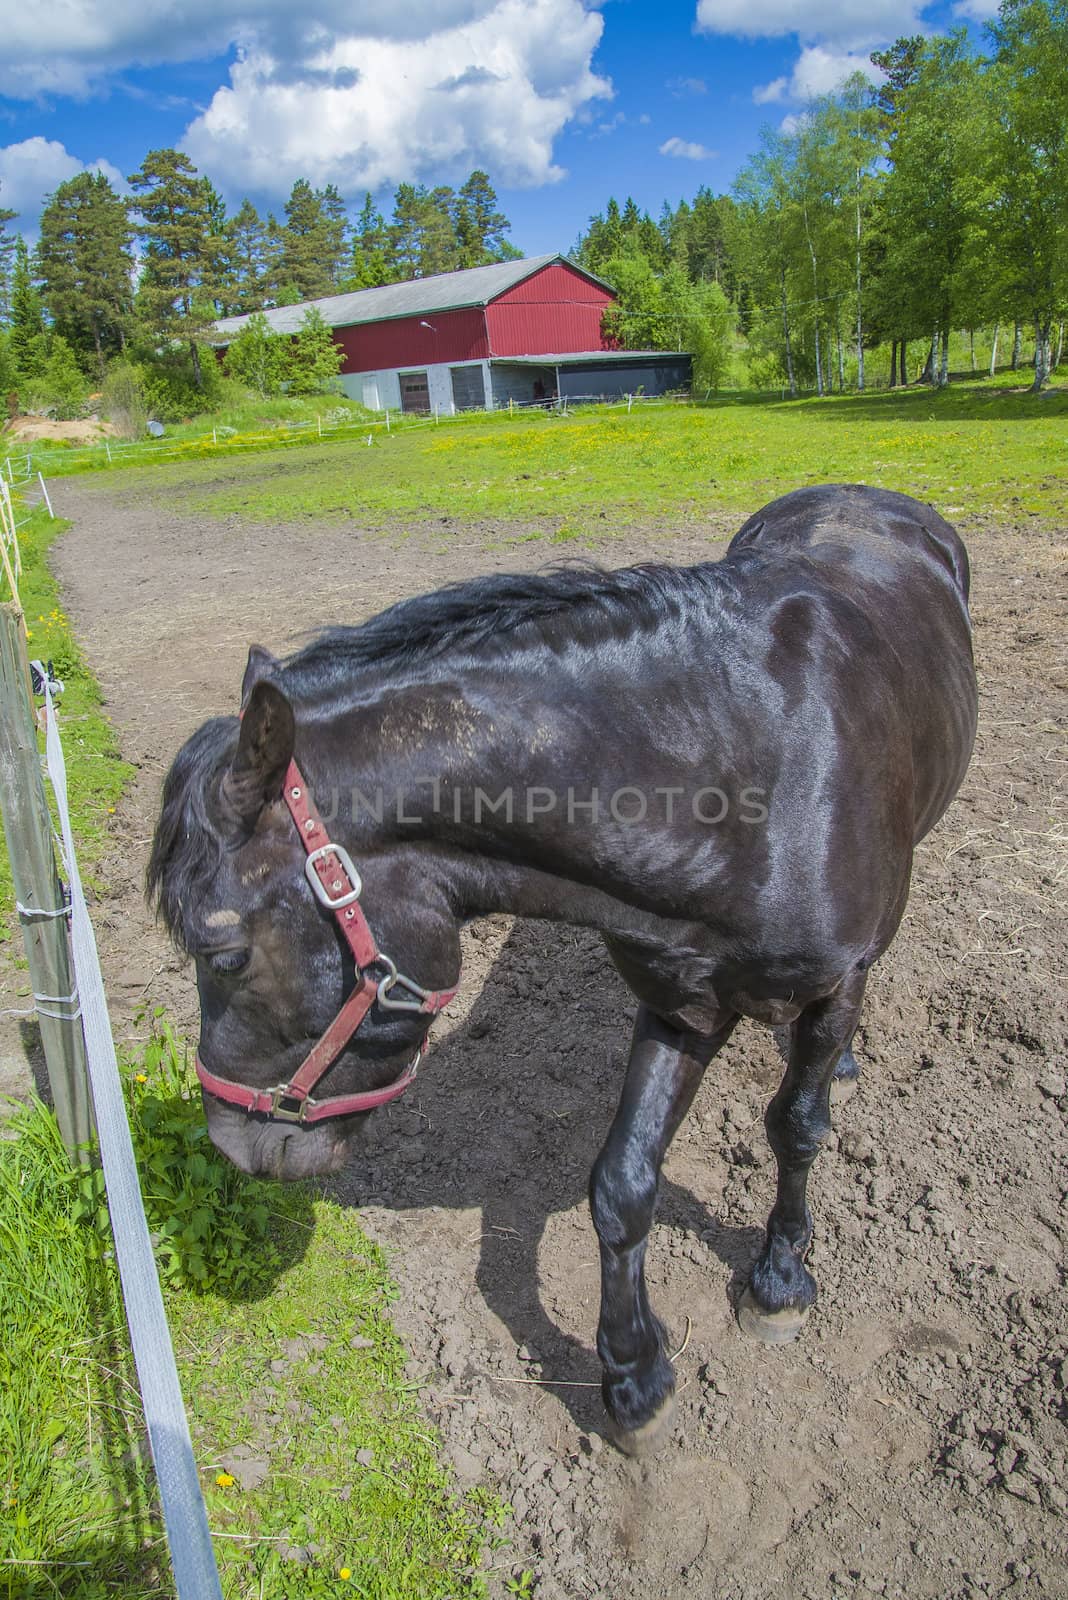 The image is shot at a farm in Aremark municipality that borders to Halden municipality, Norway